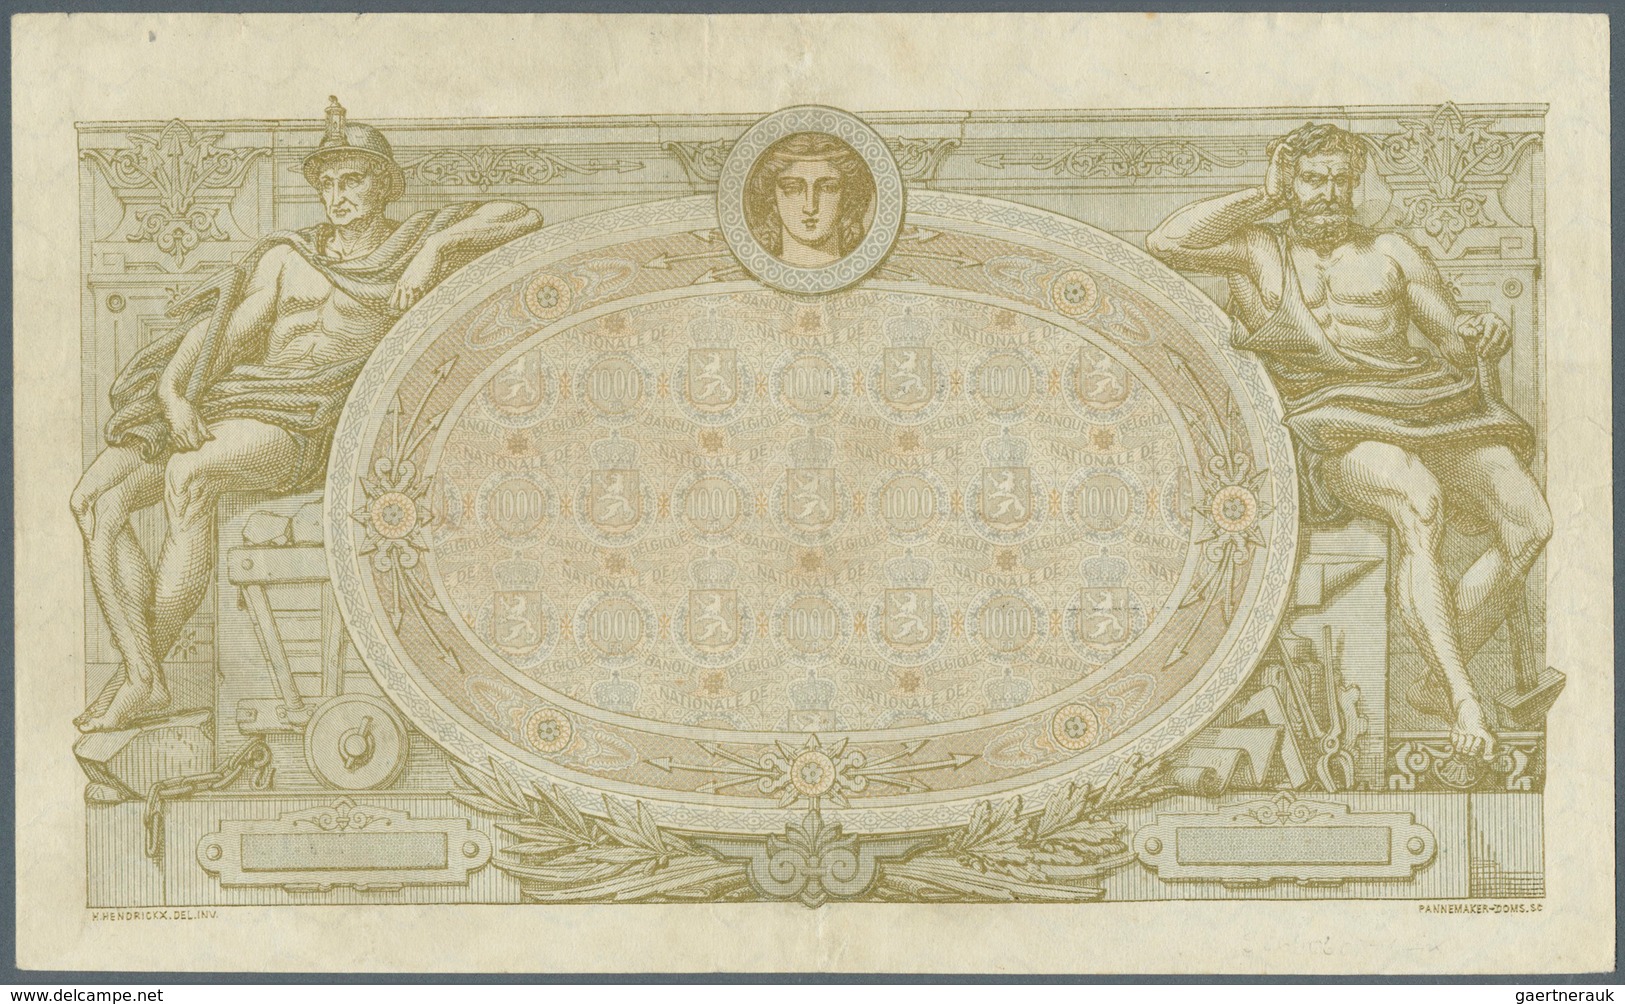 01120 Belgium / Belgien: 1000 Francs 1919 P. 73, Rare Note, 2 Center Folds And Light Creases At Borders, A - [ 1] …-1830 : Prima Dell'Indipendenza